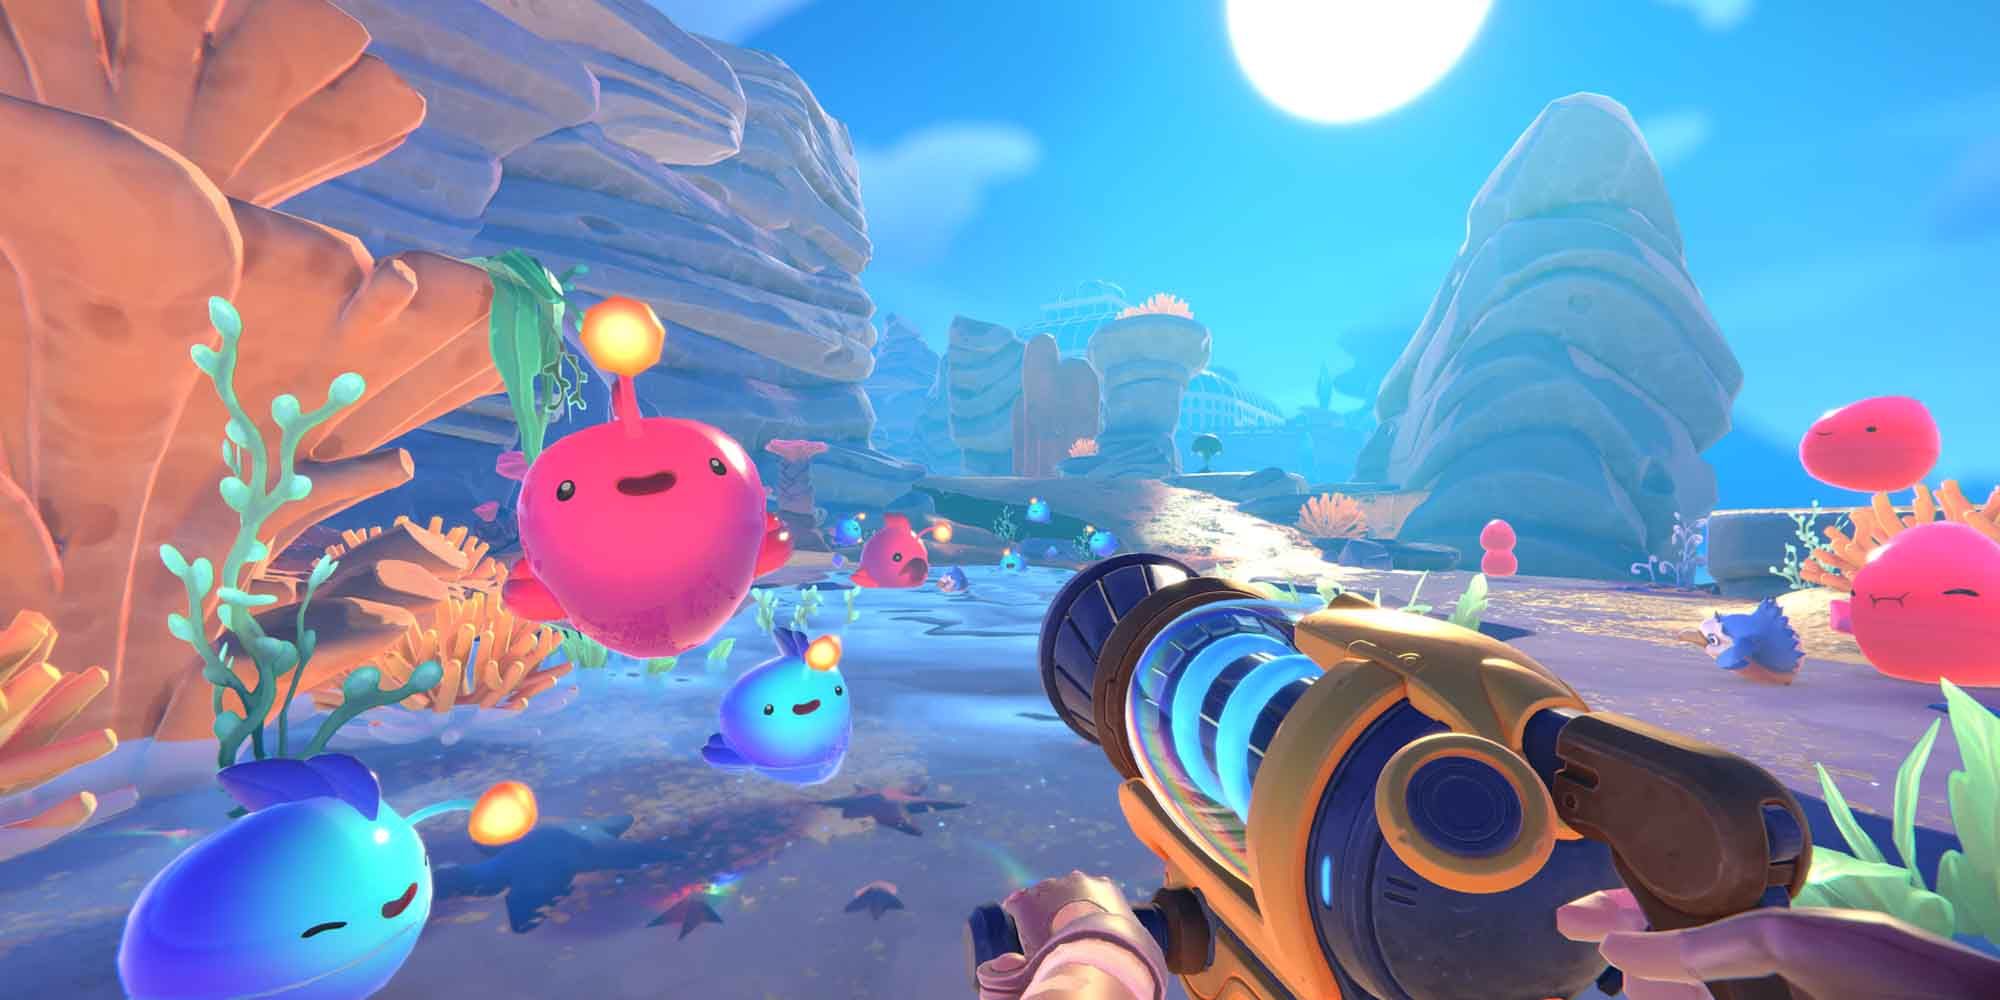 Encountering some slimes in Slime Rancher 2